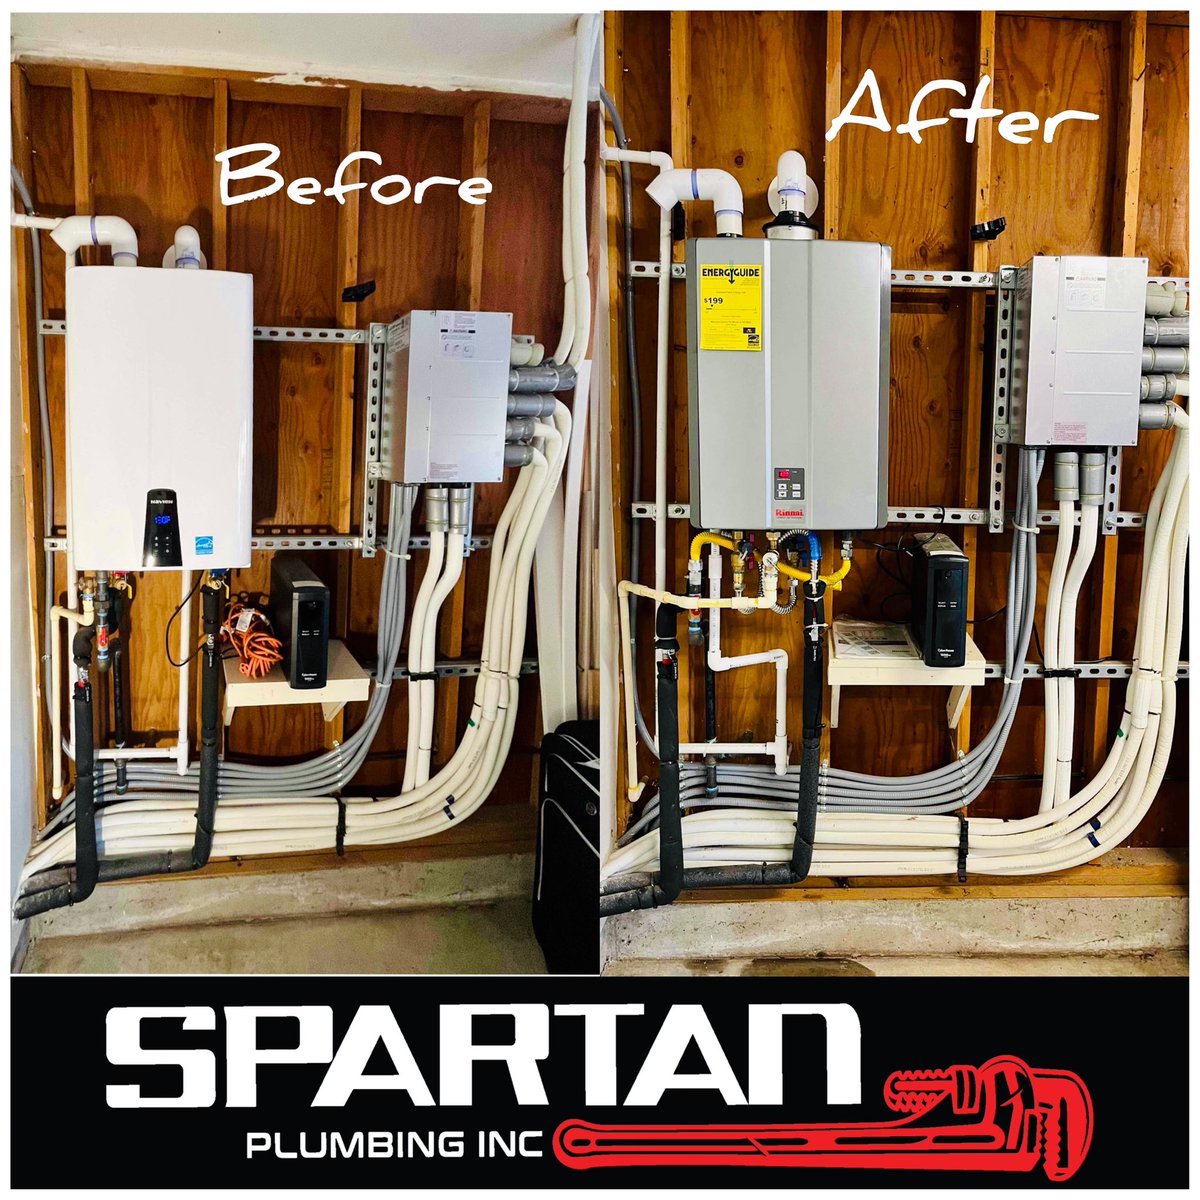 Is your #waterheater giving you trouble? Let us help! Say goodbye to #coldshowers and hello to reliable #hotwater. 

#givespartanplumbingacall #tacomawa #emergencyplumber